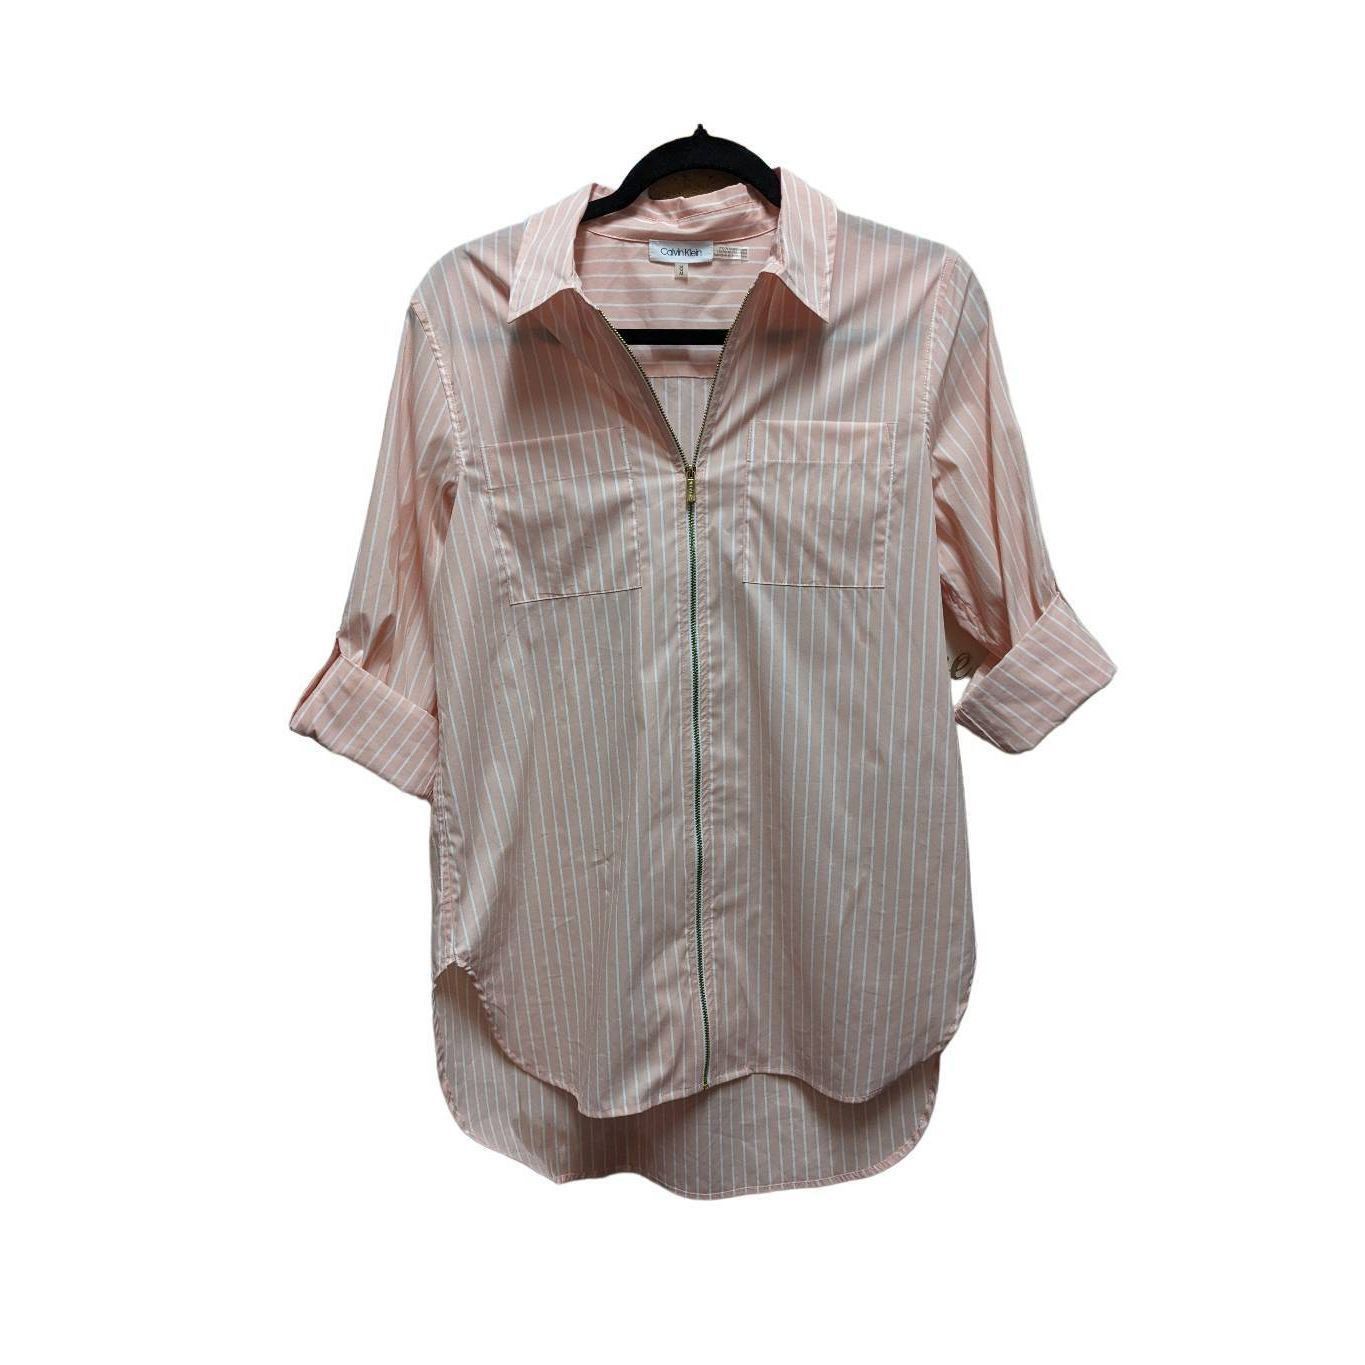 Calvin Klein Calvin Klein Women's Pink and White Striped Dress Shirt With Size M / US 6-8 / IT 42-44 - 1 Preview